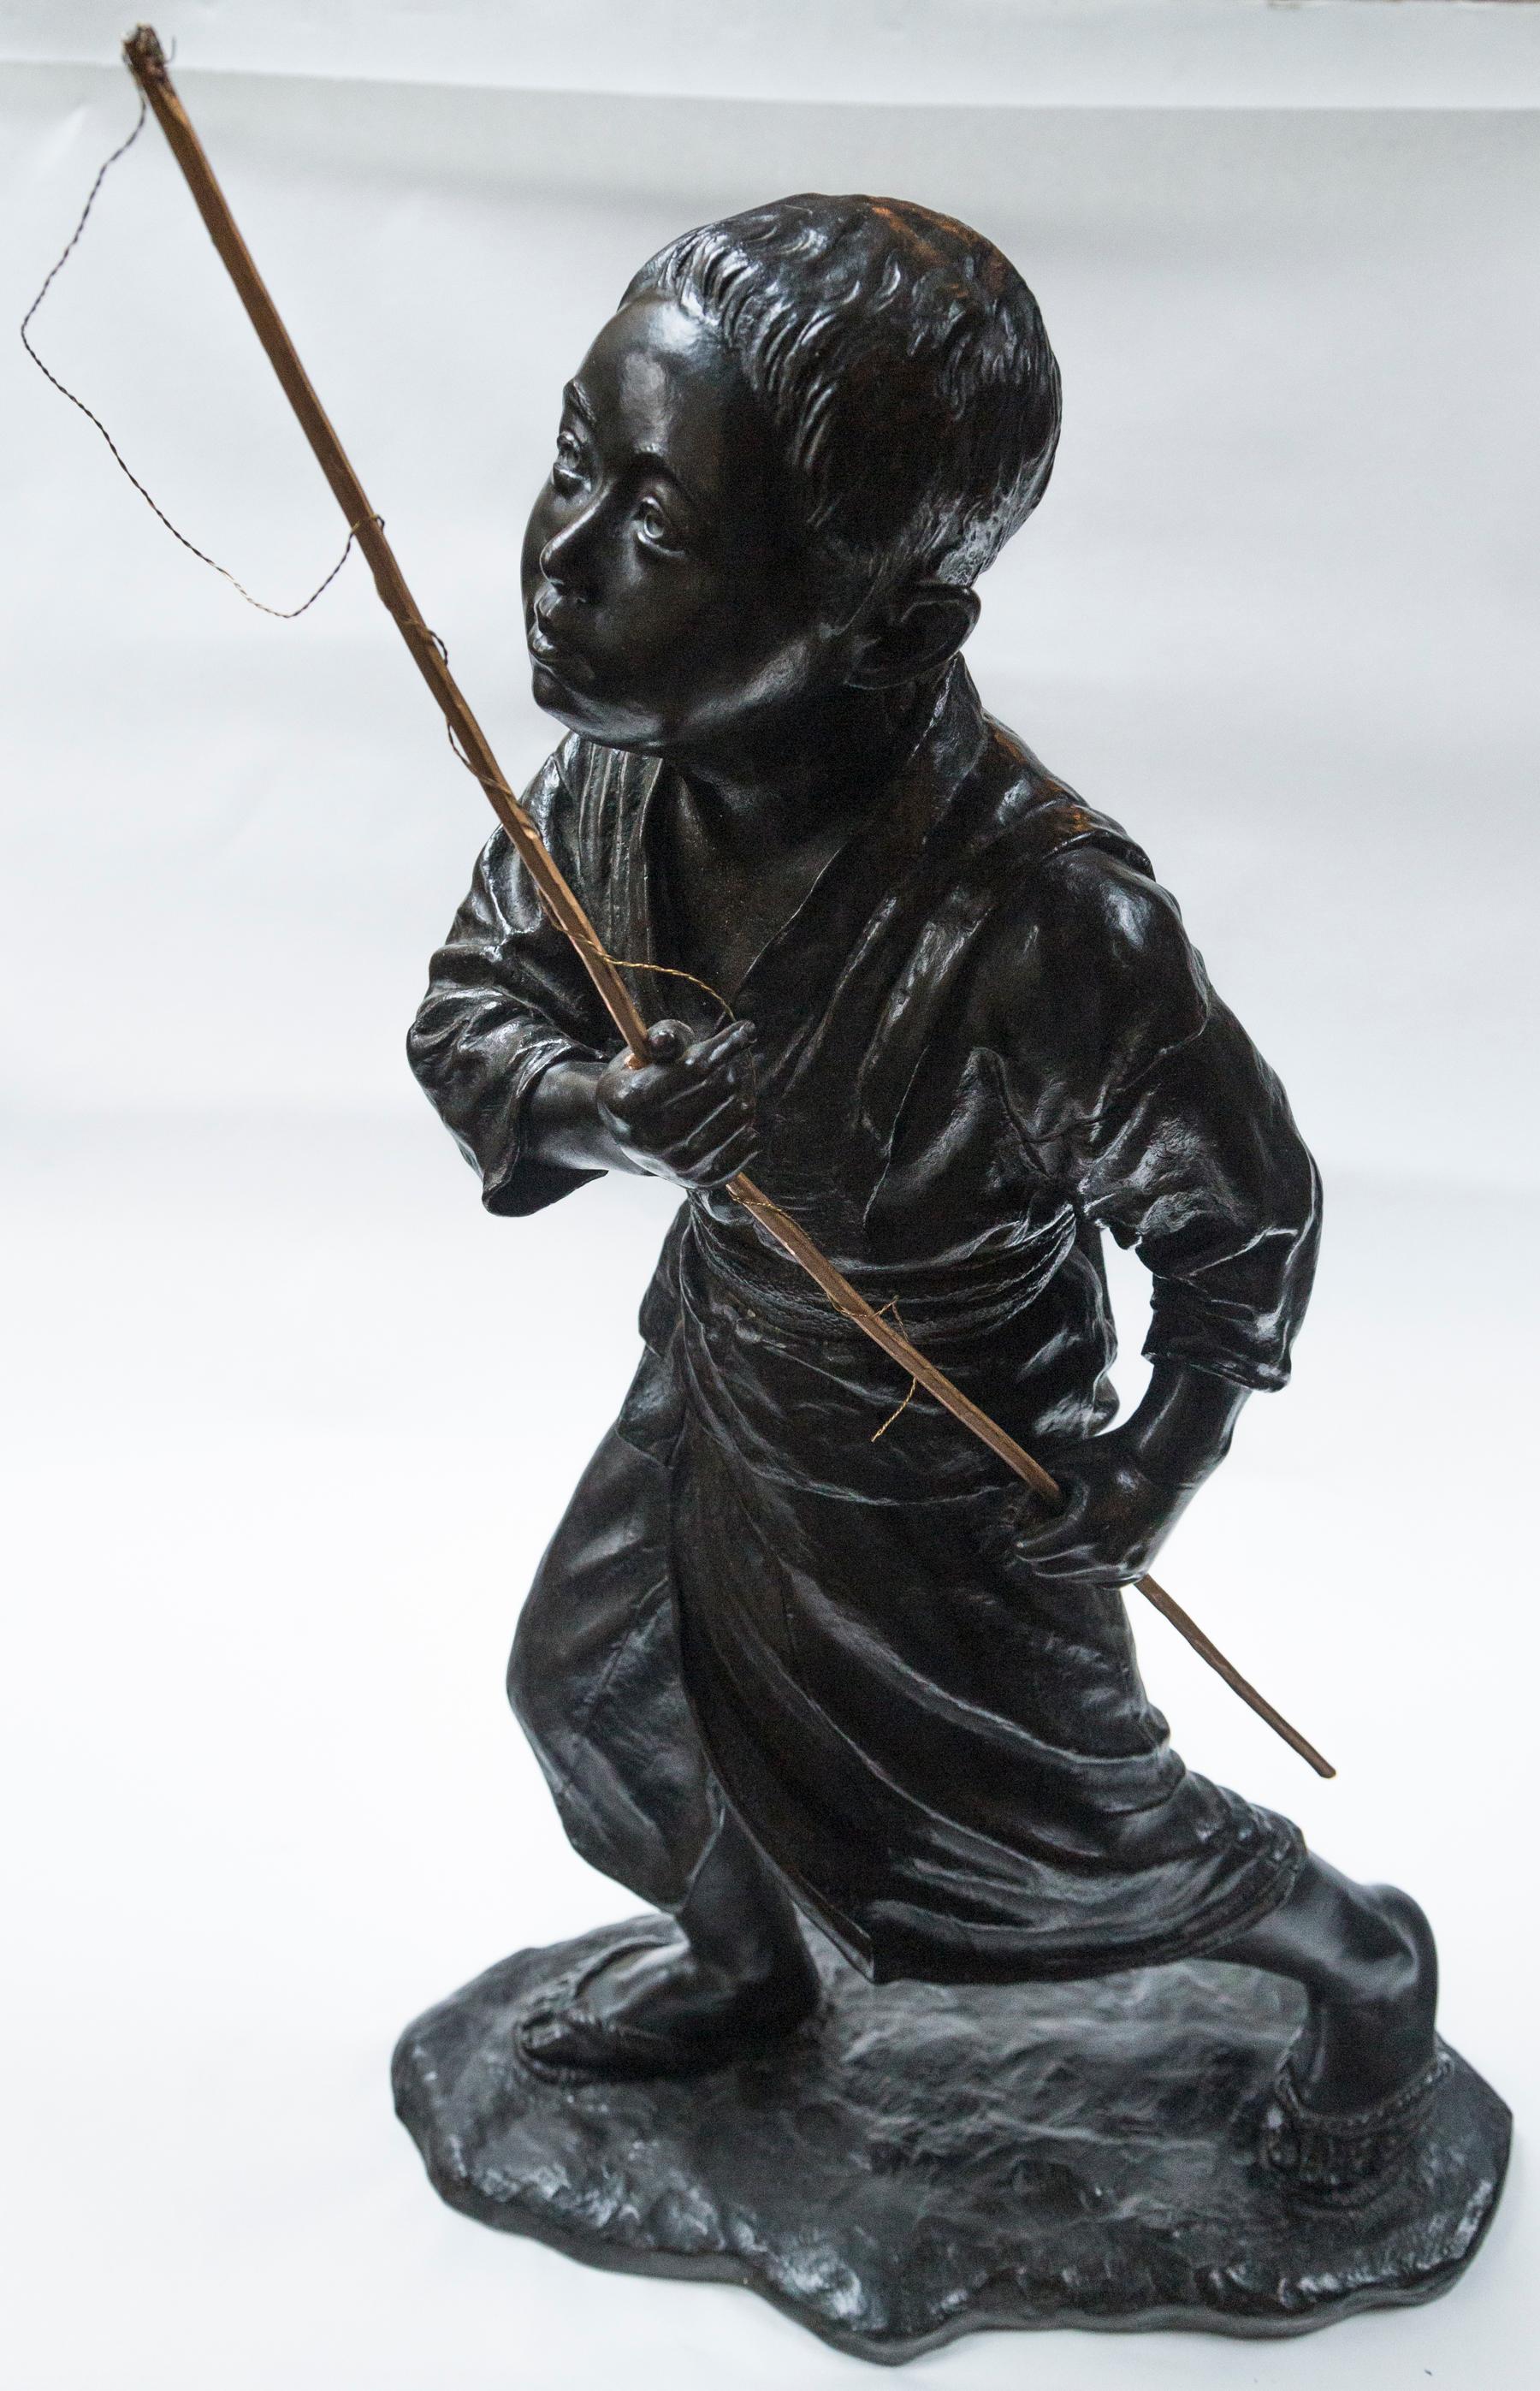 The boy is wearing a robe that is tied at the waist, and rope sandals. He carries a wooden pole with fishing line attached. To the top of the pole from the base is 26 inches. The bronze itself is 25 inches tall. He stands on a natural ground base,